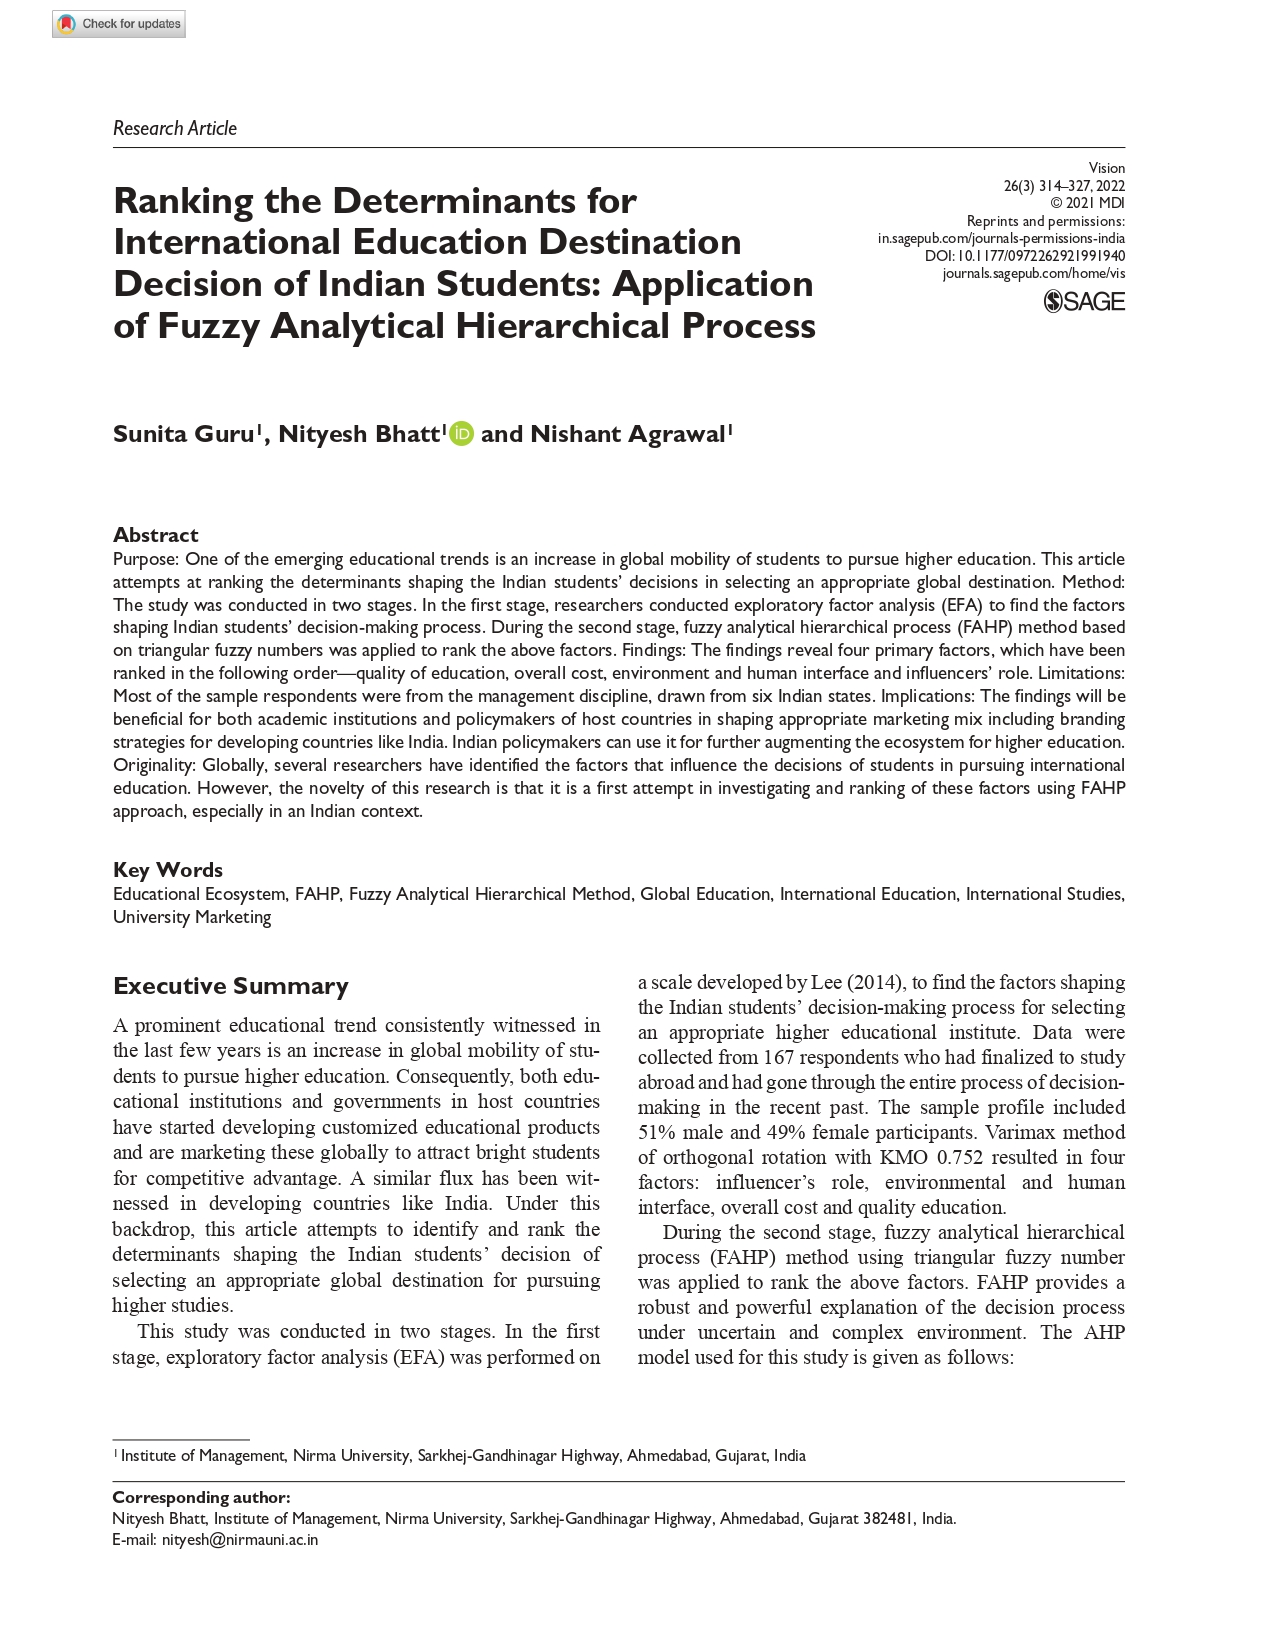 Ranking the Determinants for International Education Destination Decision of Indian Students: Application of Fuzzy Analytical Hierarchical Process